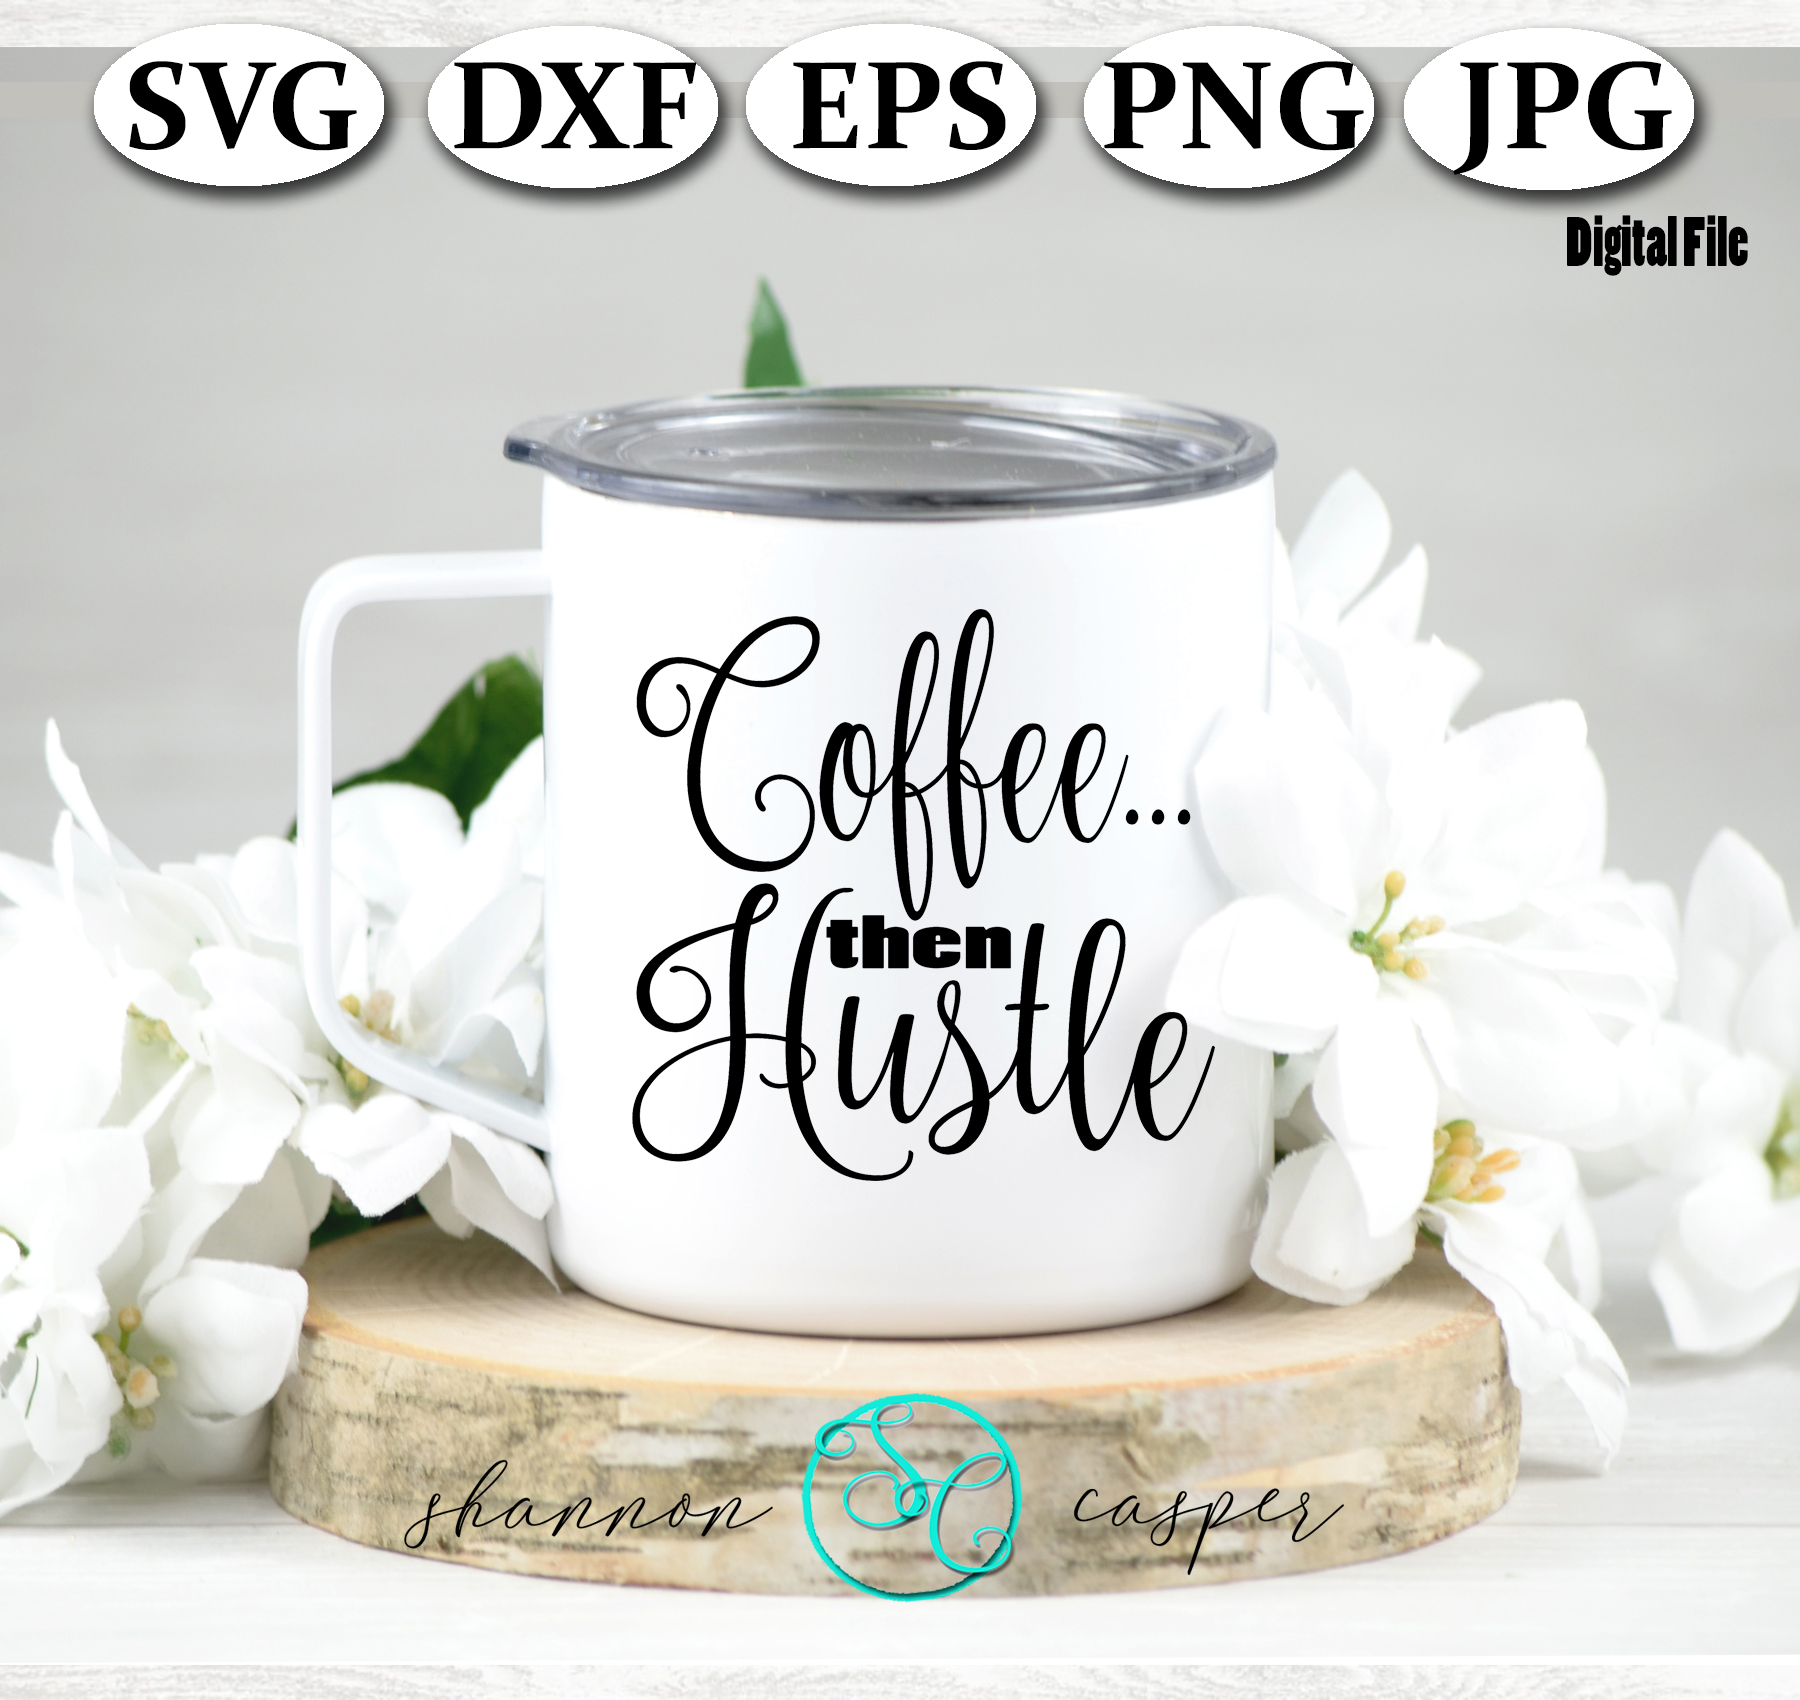 Funny Coffee Quote SVG| Coffee then Hustle|Coffee Cup Saying